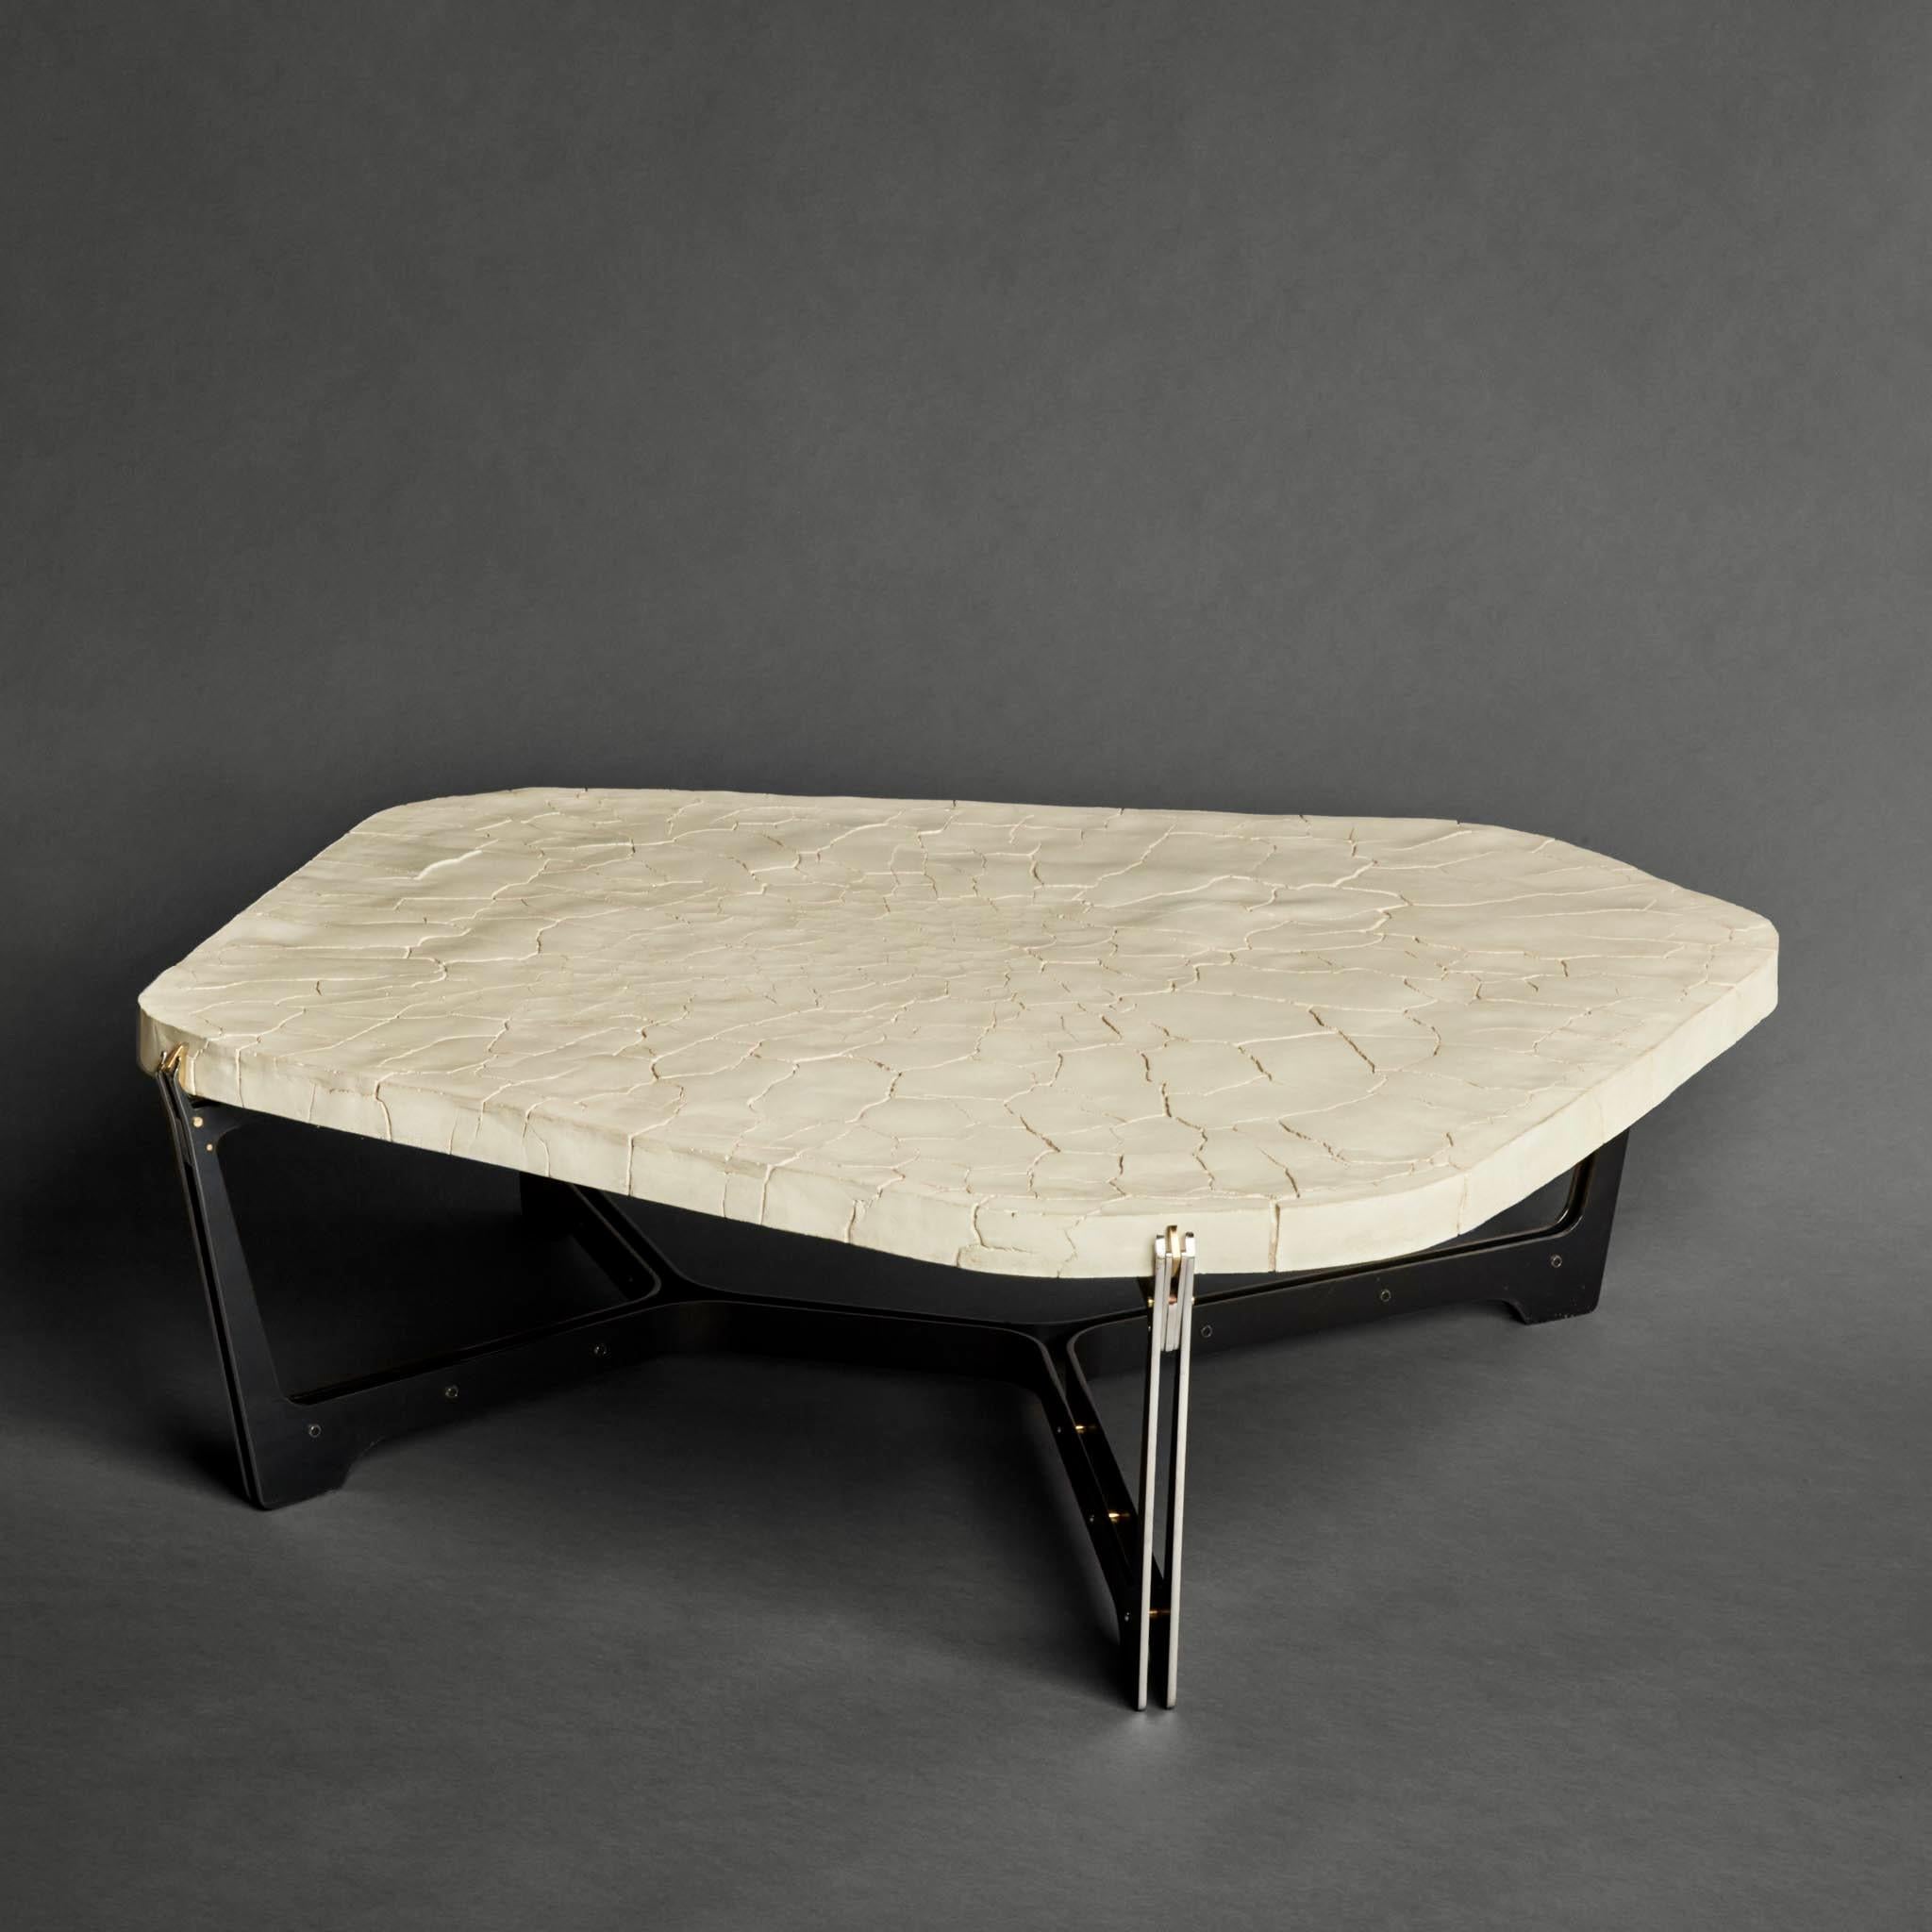 Contemporary Pentagonal White Concrete w/Black Steel & Brass Details Coffee Table by Boulloud For Sale